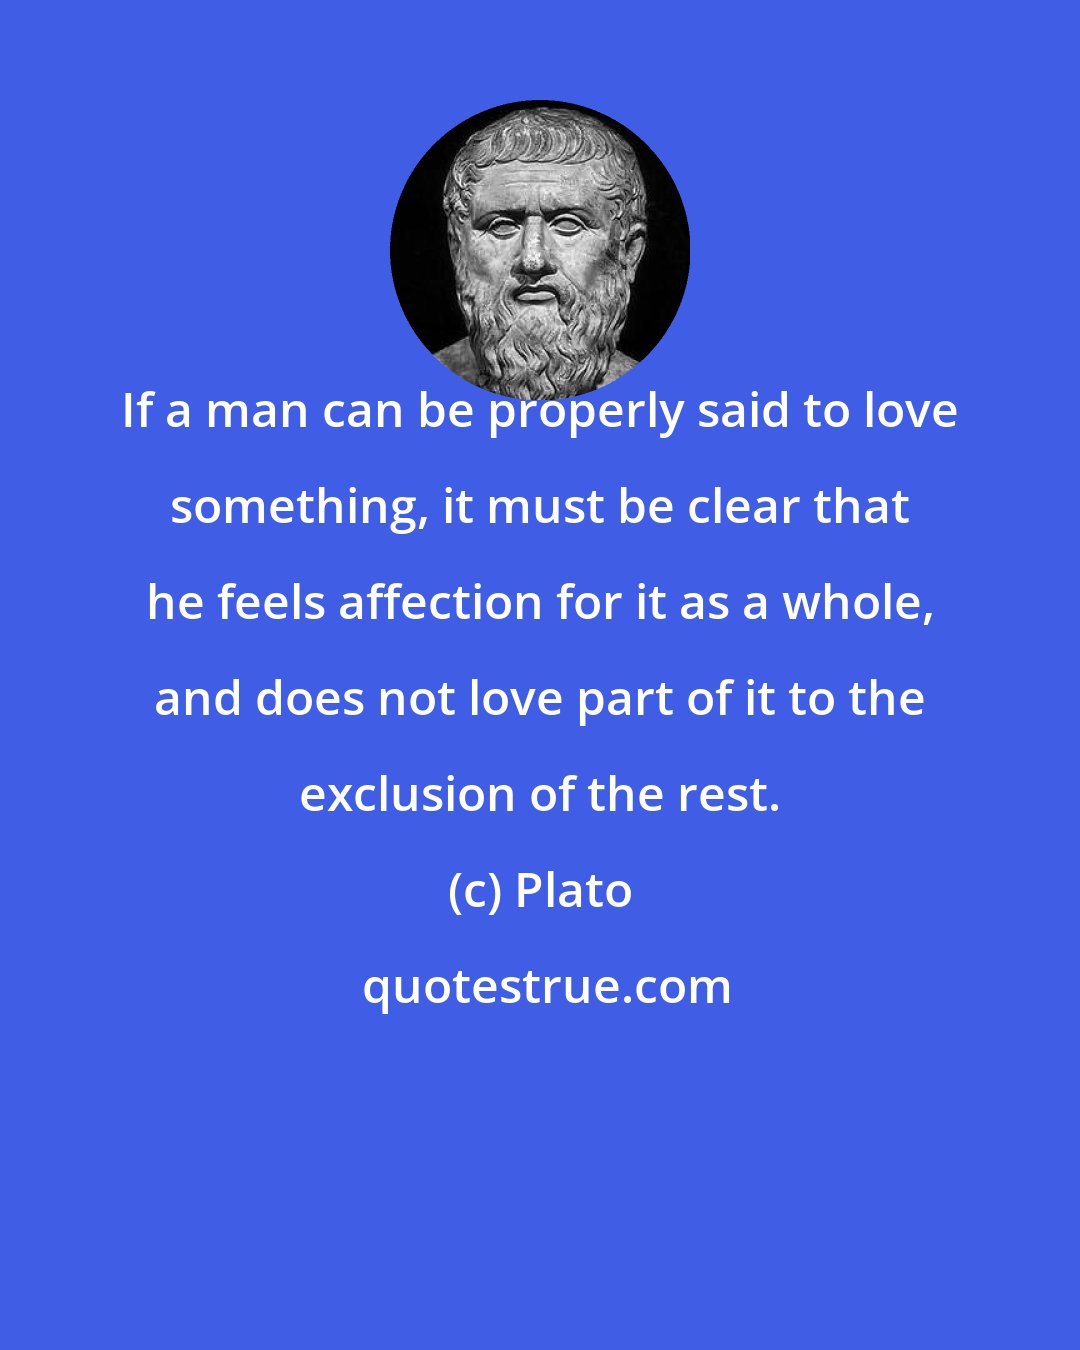 Plato: If a man can be properly said to love something, it must be clear that he feels affection for it as a whole, and does not love part of it to the exclusion of the rest.